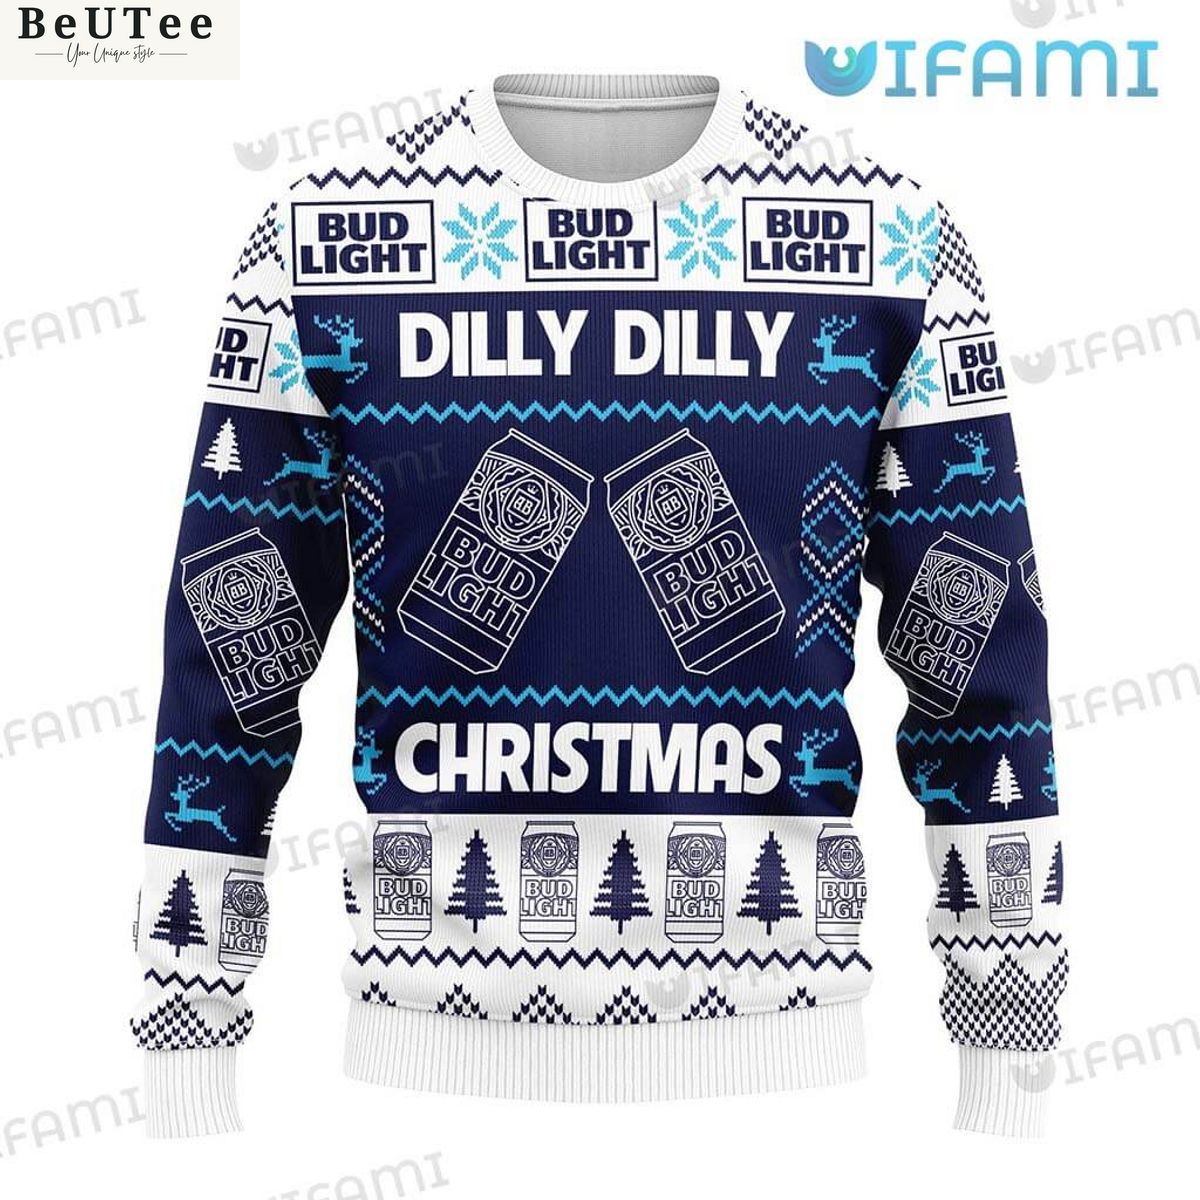 bud light dilly dilly ugly sweater christmas gift for beer lover 1 K4cVP.jpg